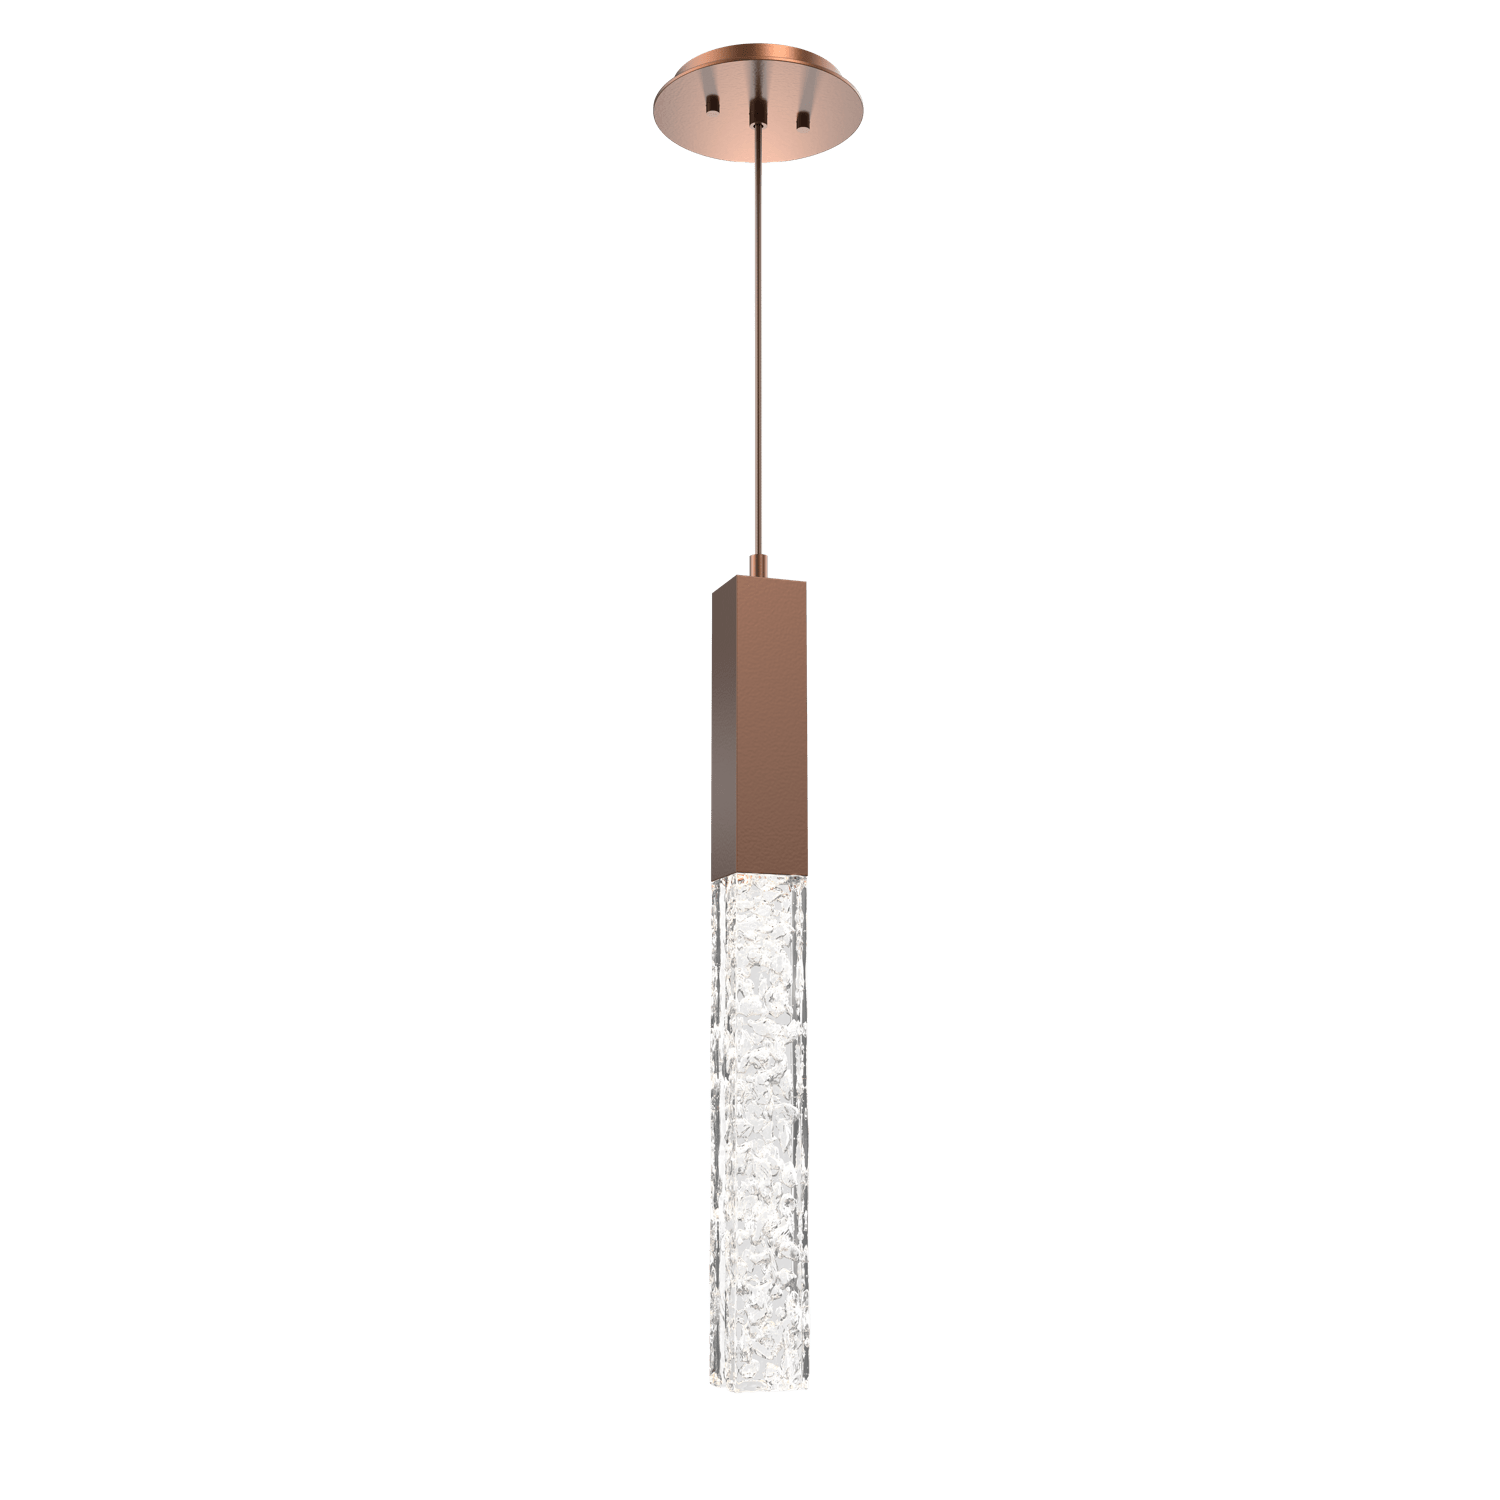 LAB0060-01-BB-GC-Hammerton-Studio-Axis-Pendant-Light-with-Burnished-Bronze-finish-and-clear-cast-glass-and-LED-lamping